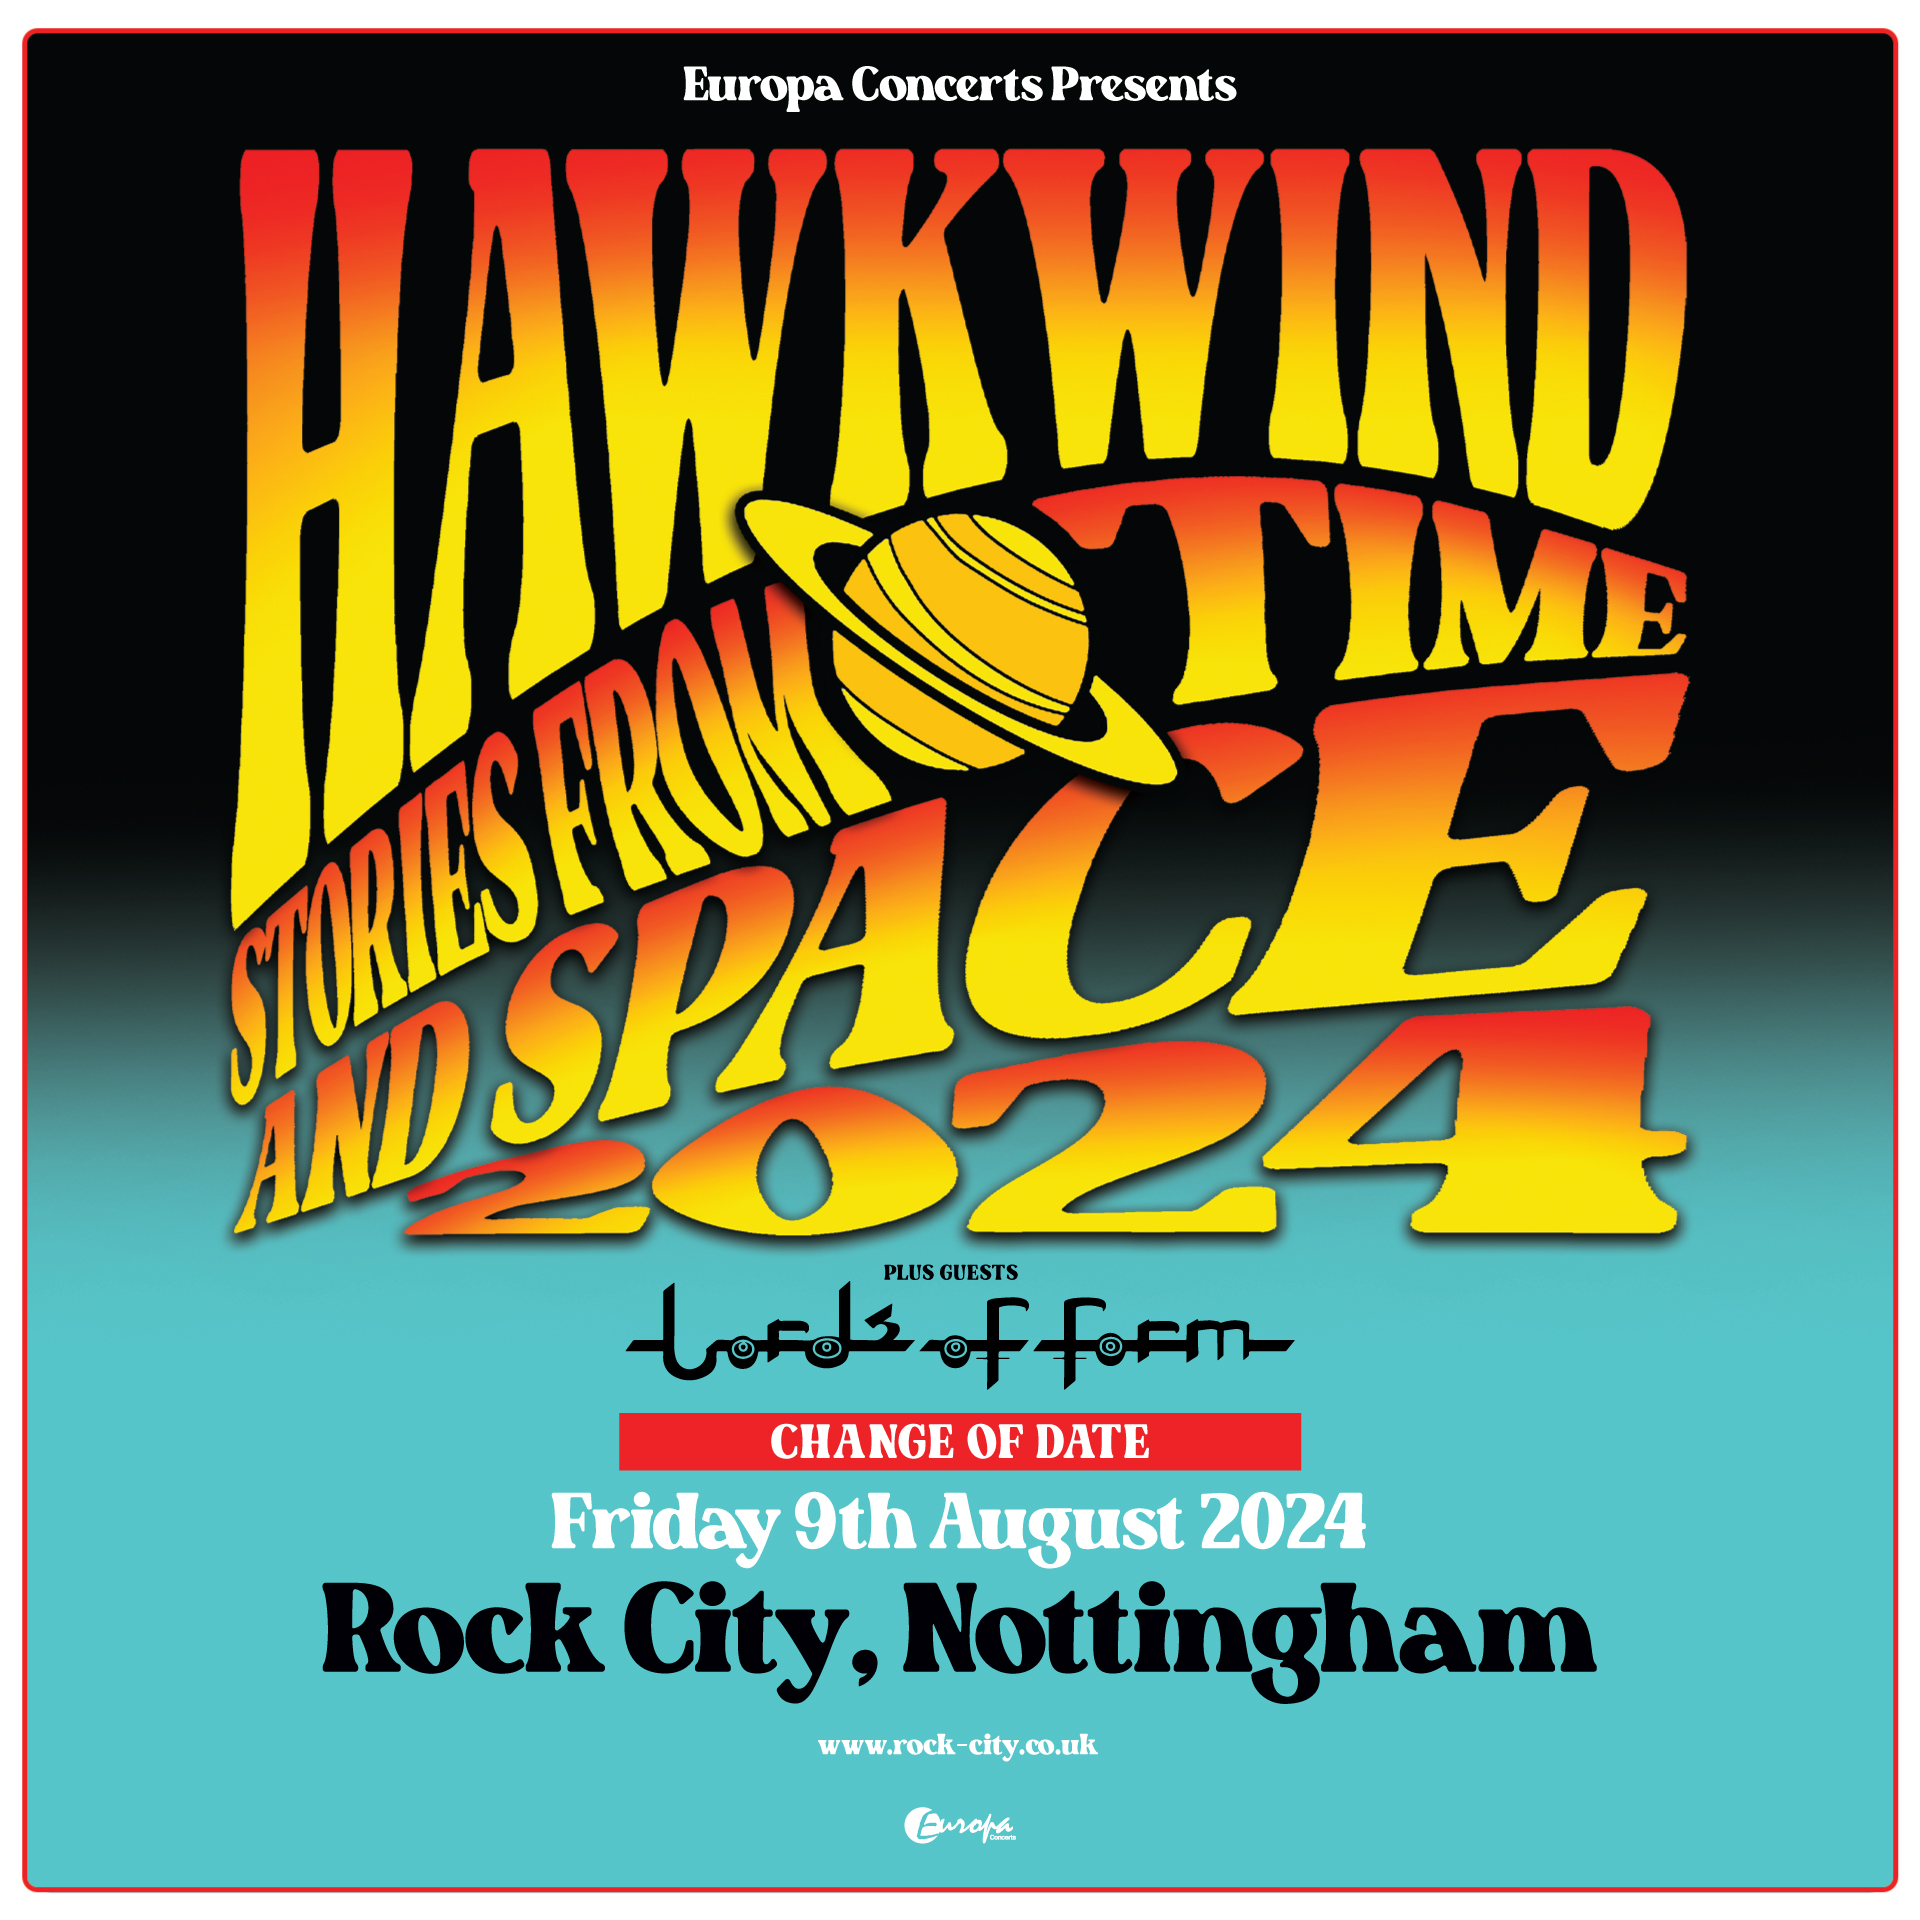 HAWKWIND POSTER